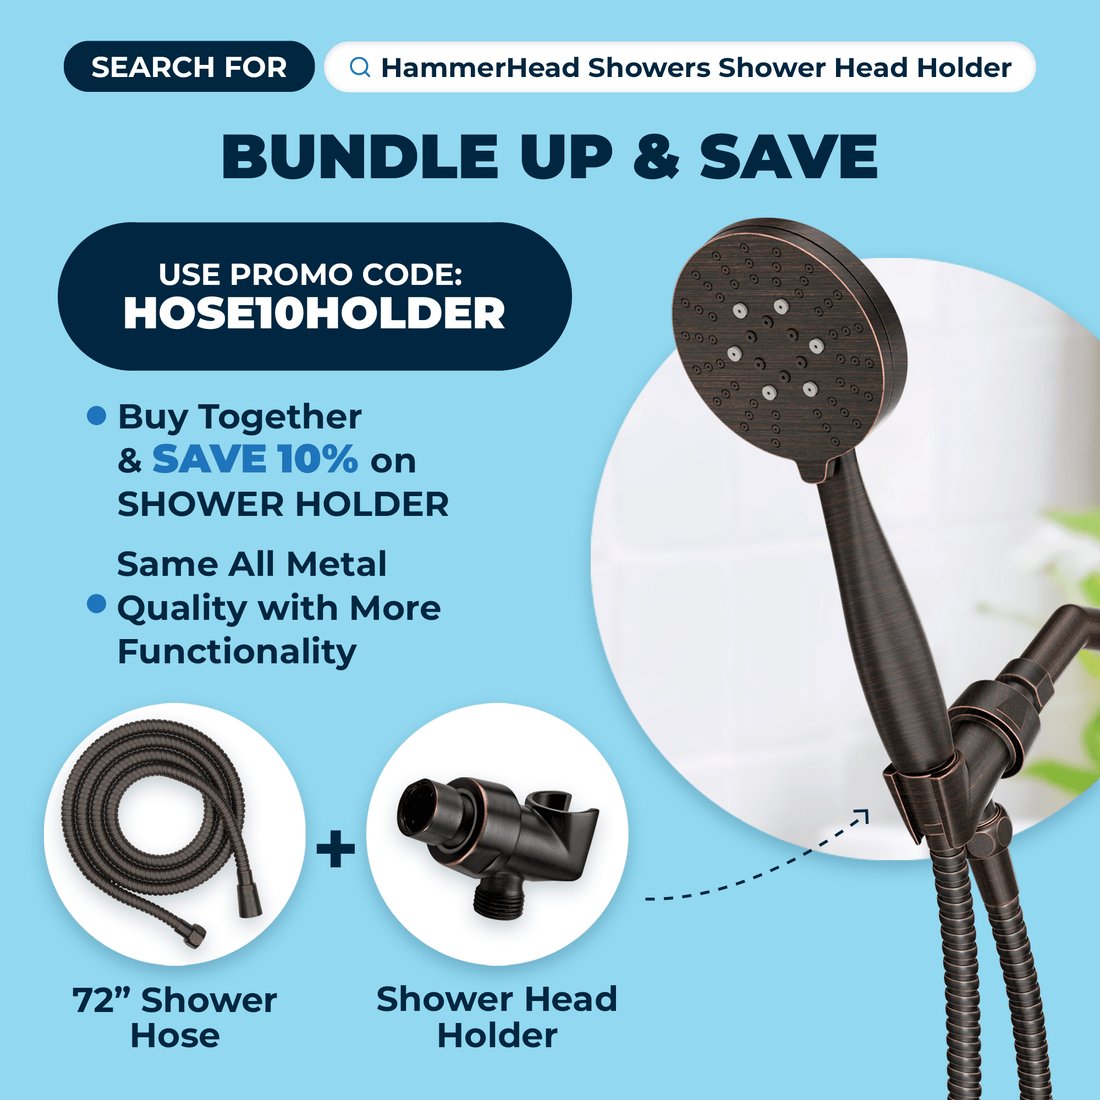 HammerHead Showers 72-Inch Shower Hose Bundle Up (Oil Rubbed Bronze) - The Shower Head Store